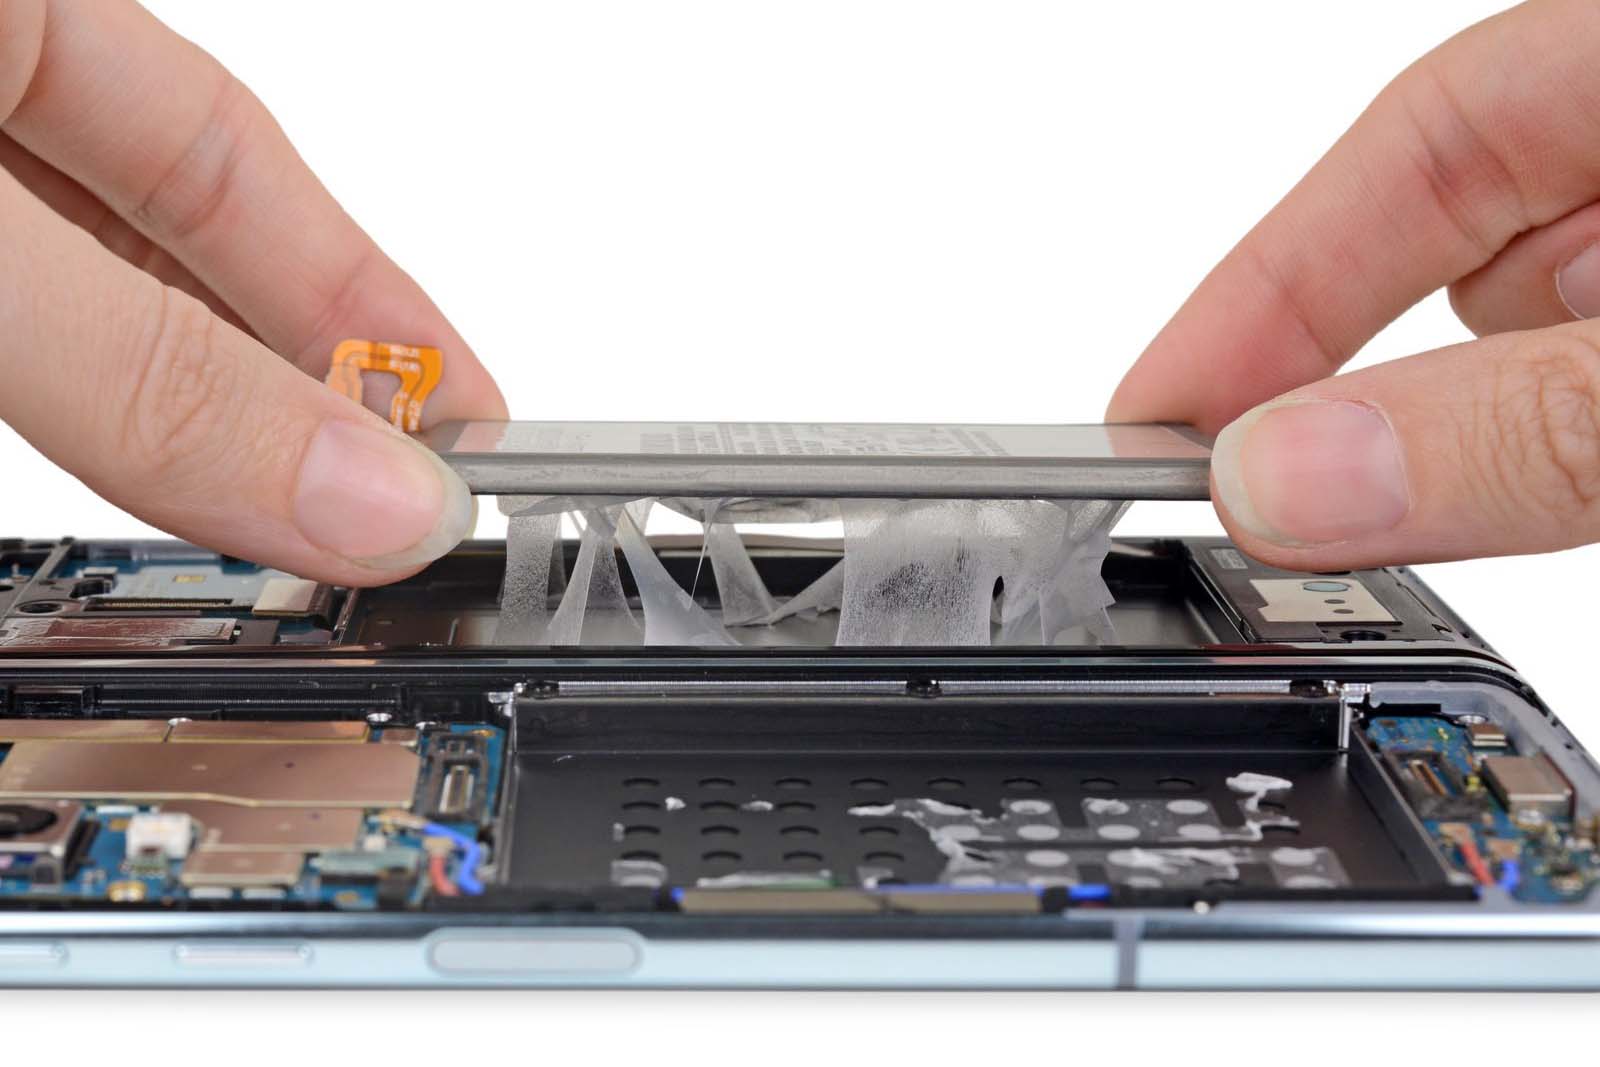 iFixit continues to support repair-friendly practices and regulations.